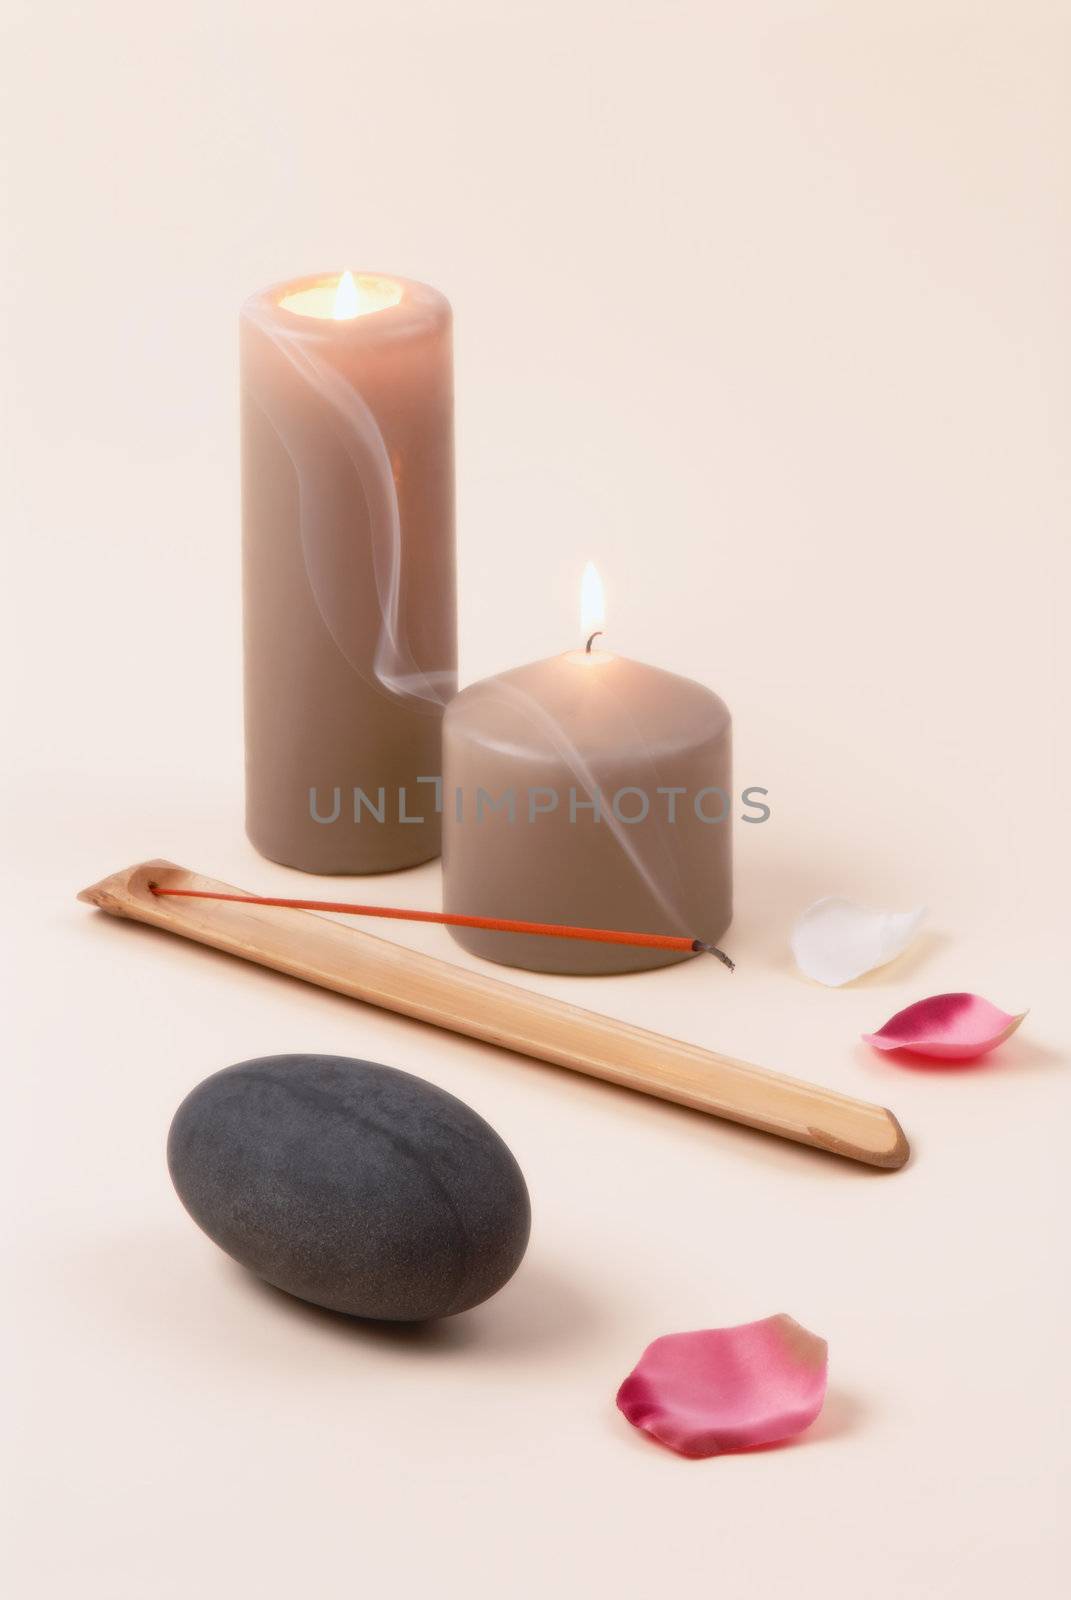 This image present some aspects of relaxation and body treatment.Style: "Neutral"